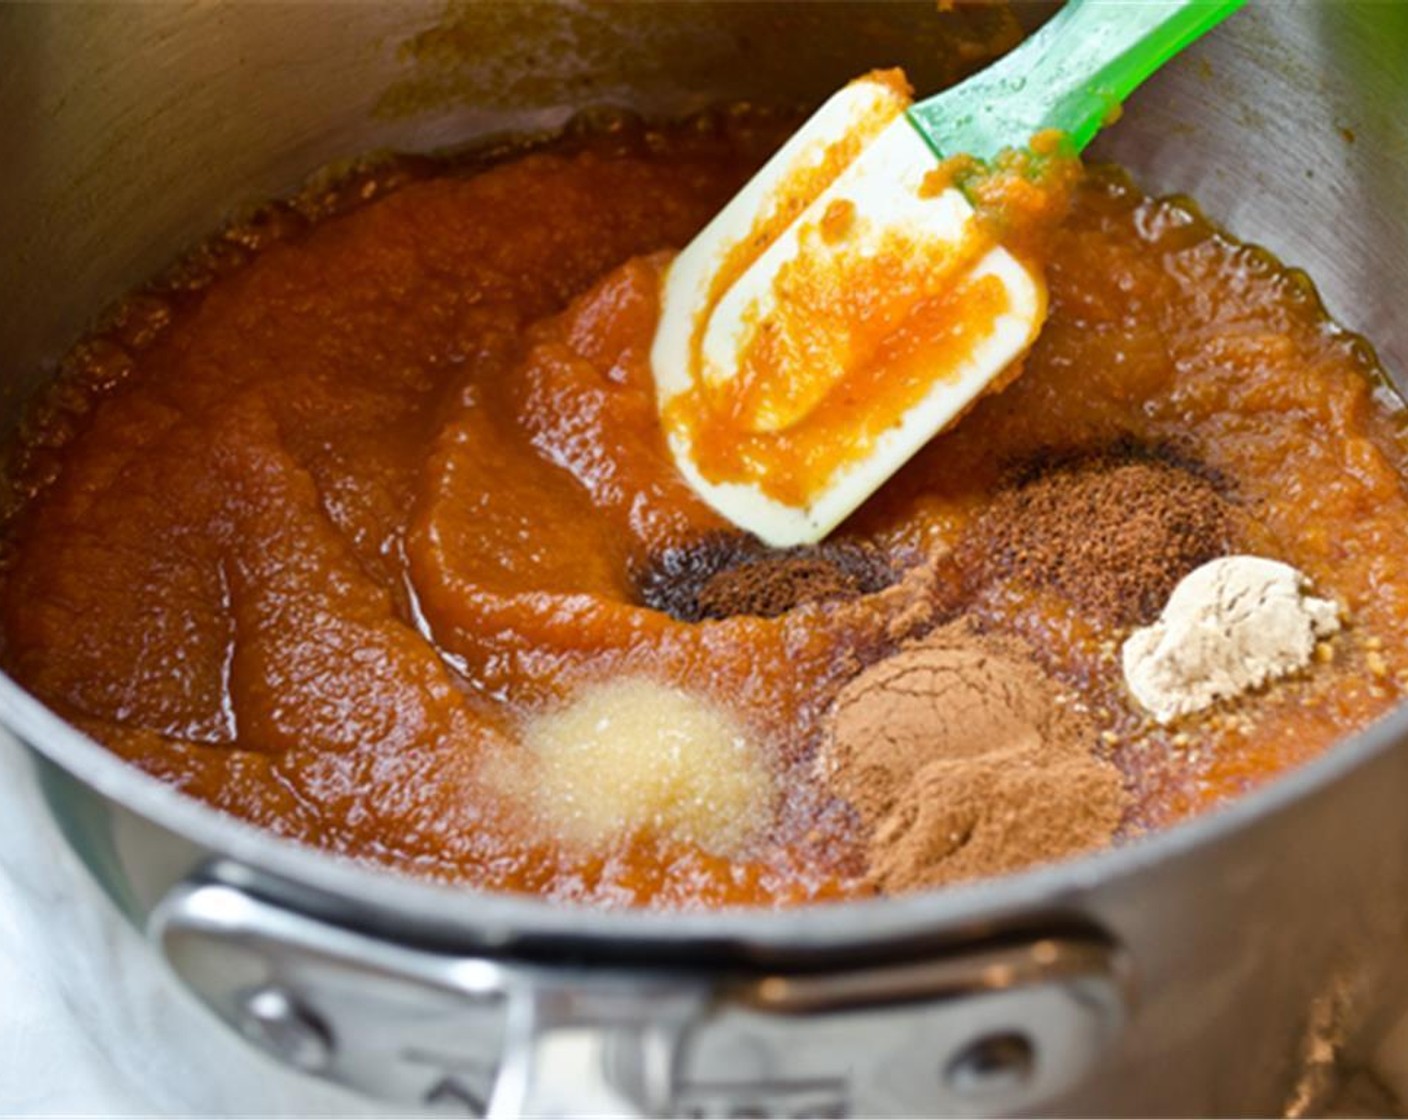 step 5 For the filling, bring about 4 quarts of water to a simmer in a tea kettle. In a small saucepan, stir together the Canned Pumpkin Purée (1 can), Granulated Sugar (1 1/3 cups), Ground Cinnamon (1 tsp), Ground Ginger (1/2 tsp), Ground Nutmeg (1/4 tsp), Ground Cloves (1/4 tsp), and Salt (1/2 tsp).